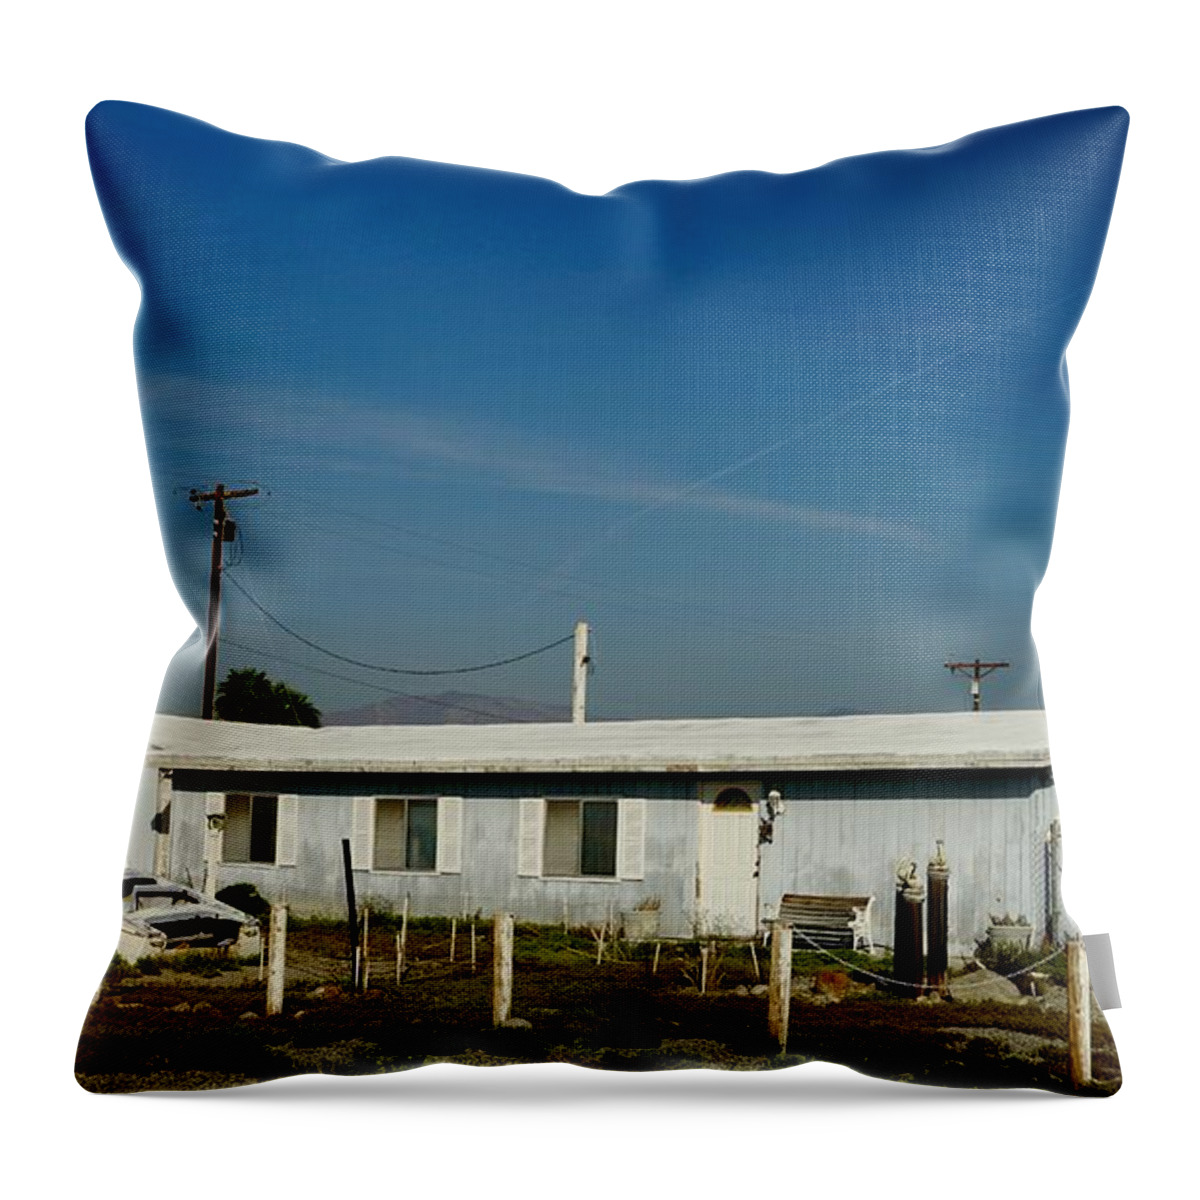 Marooned Throw Pillow featuring the photograph Blue Marooned by Eric Suchman